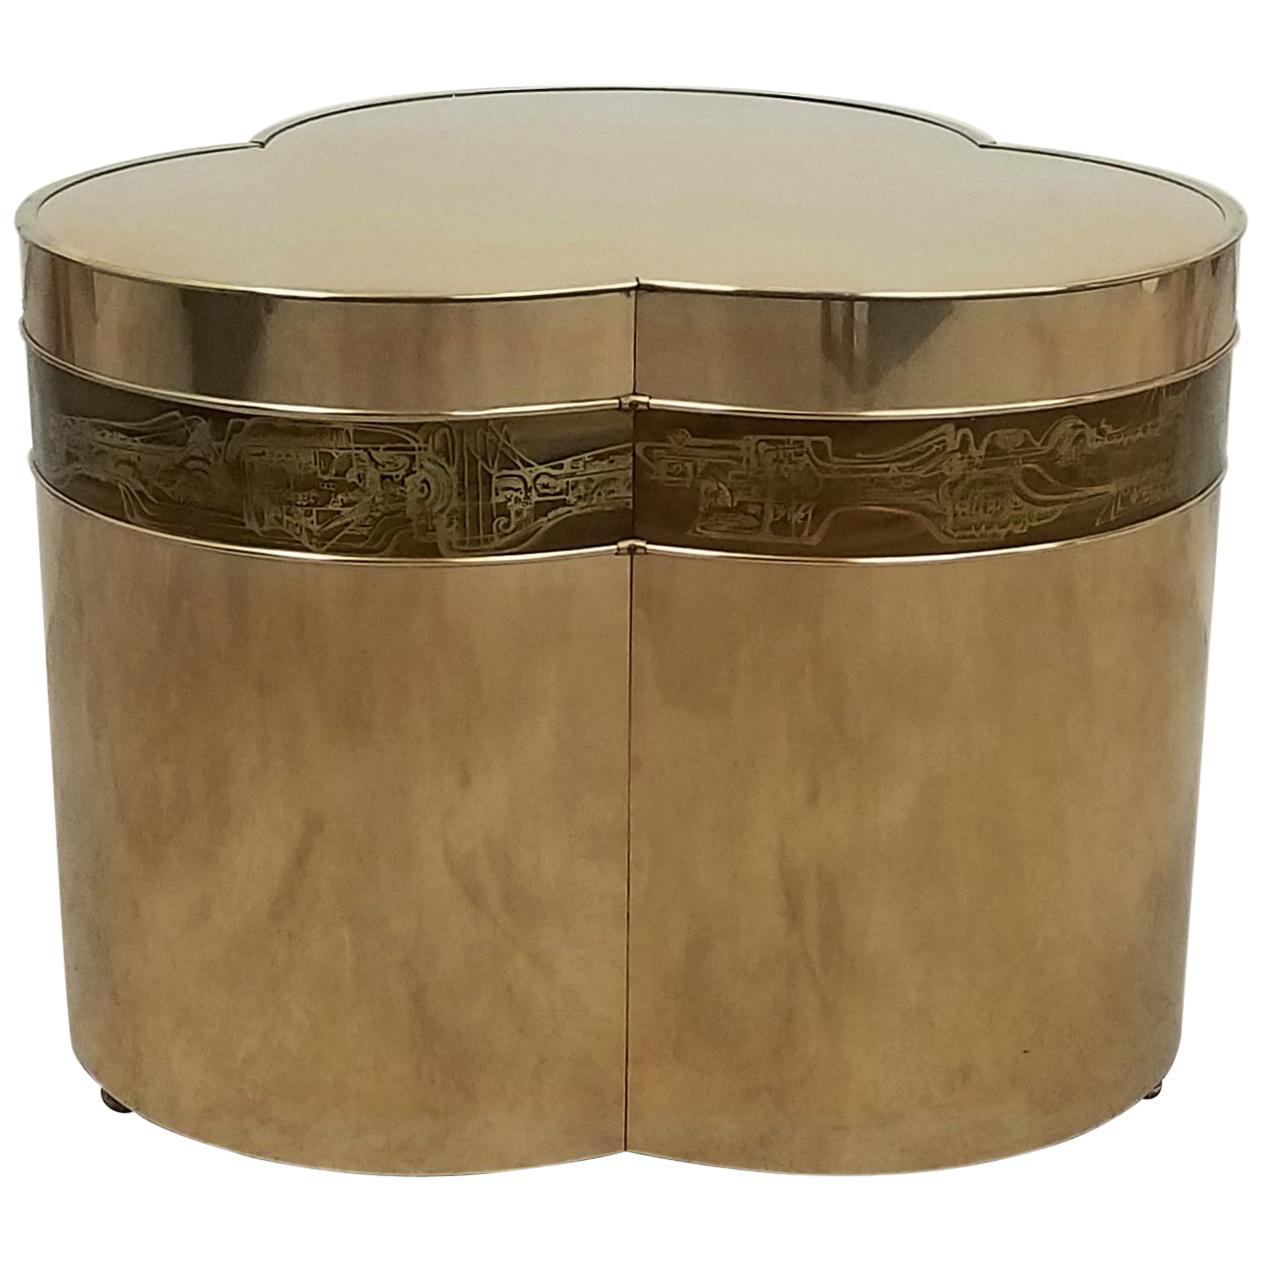 Bronze Trefoil Side or Coffee Table Base by Bernhard Rohne for Mastercraft